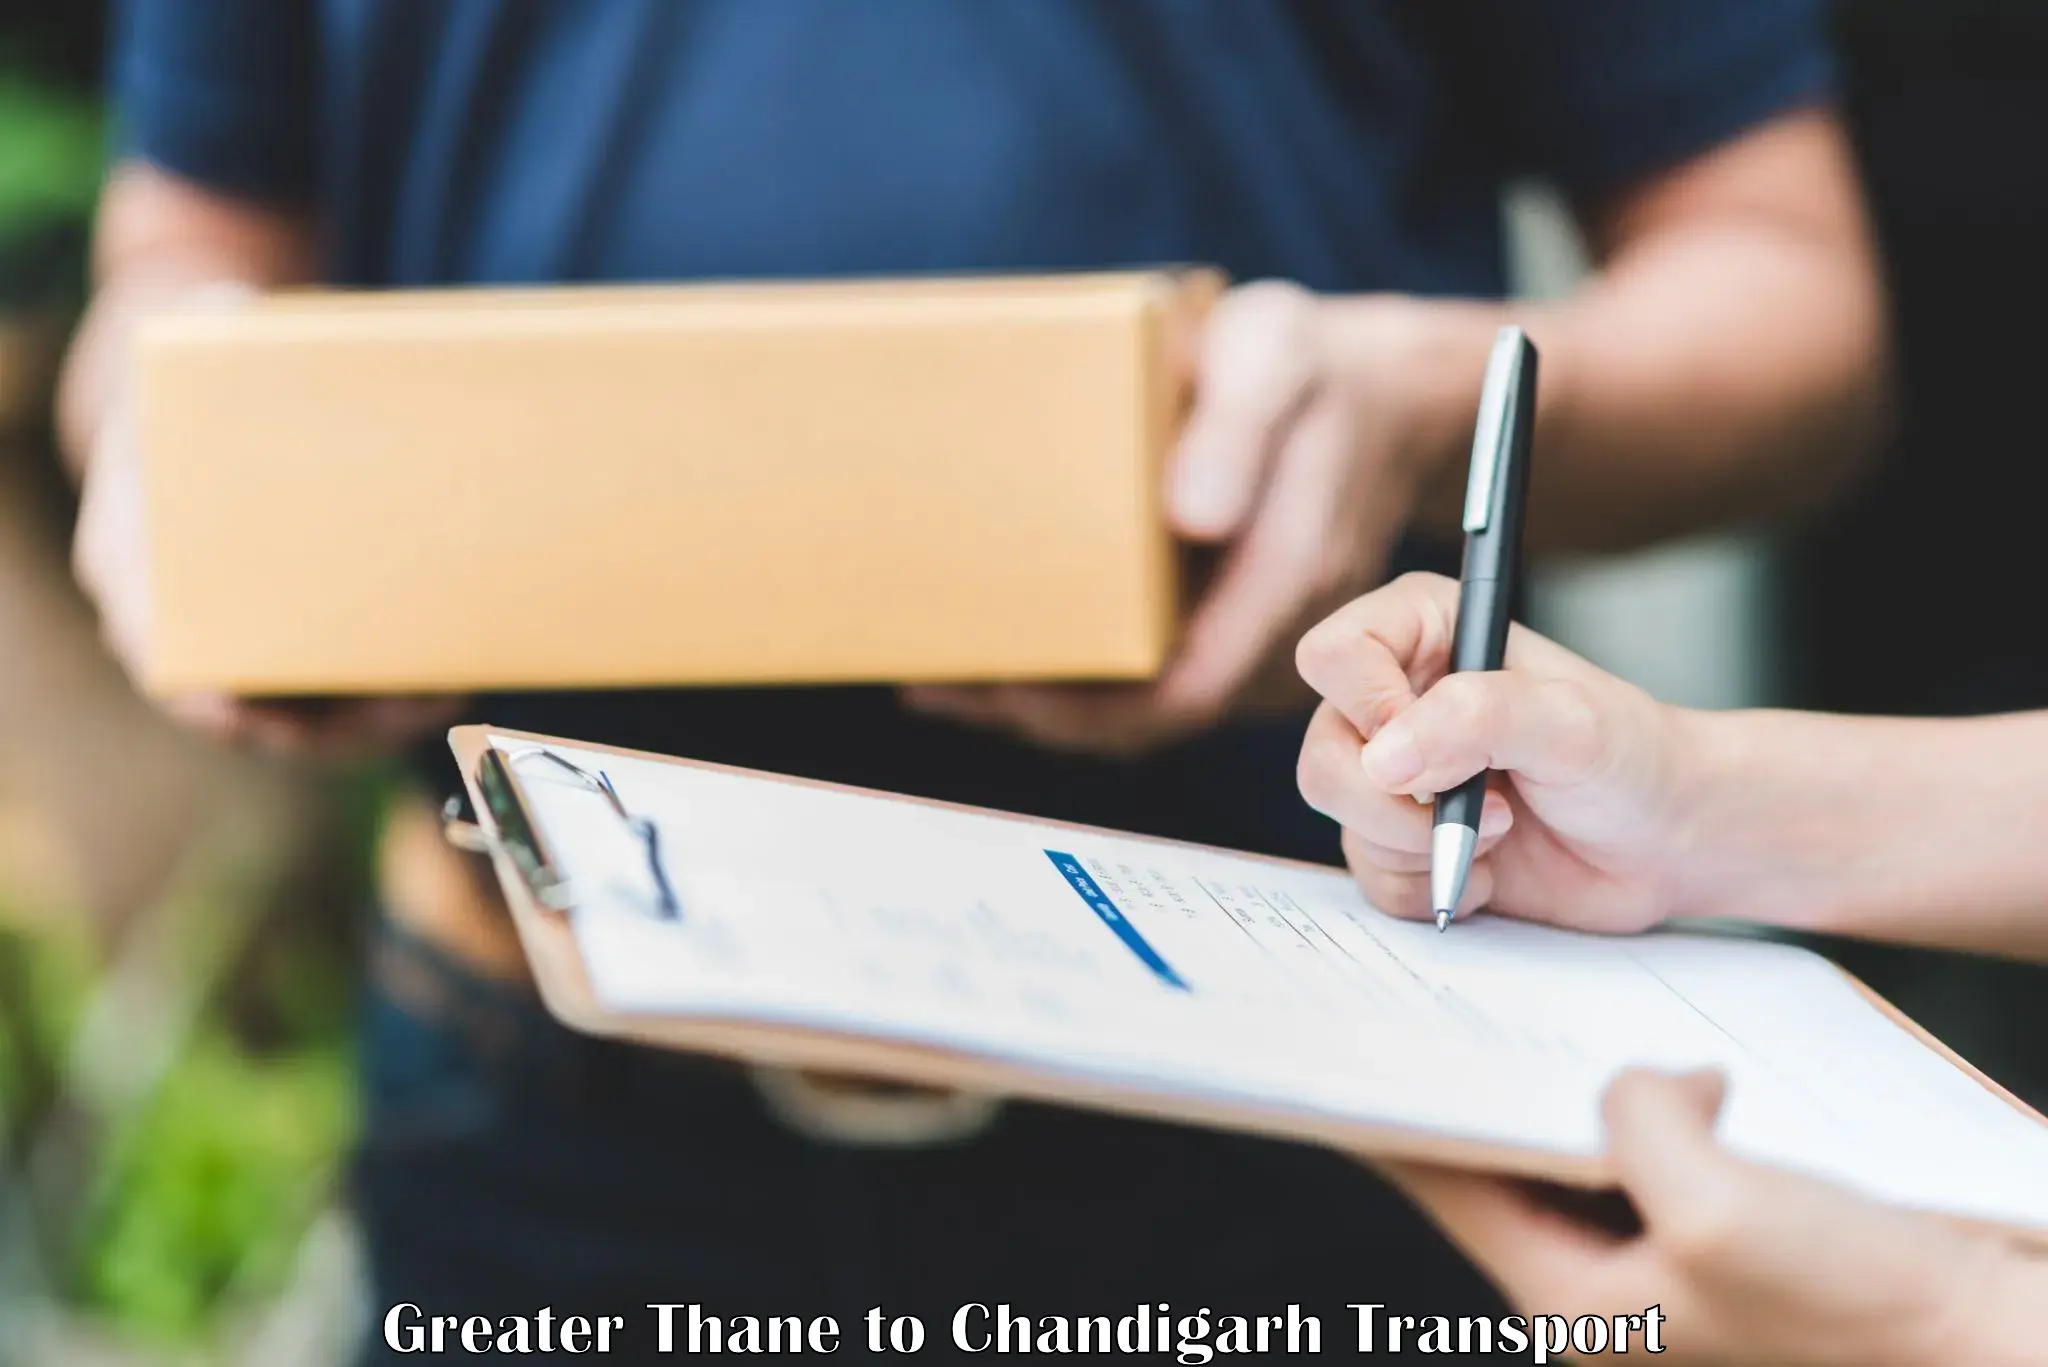 Transport in sharing Greater Thane to Chandigarh